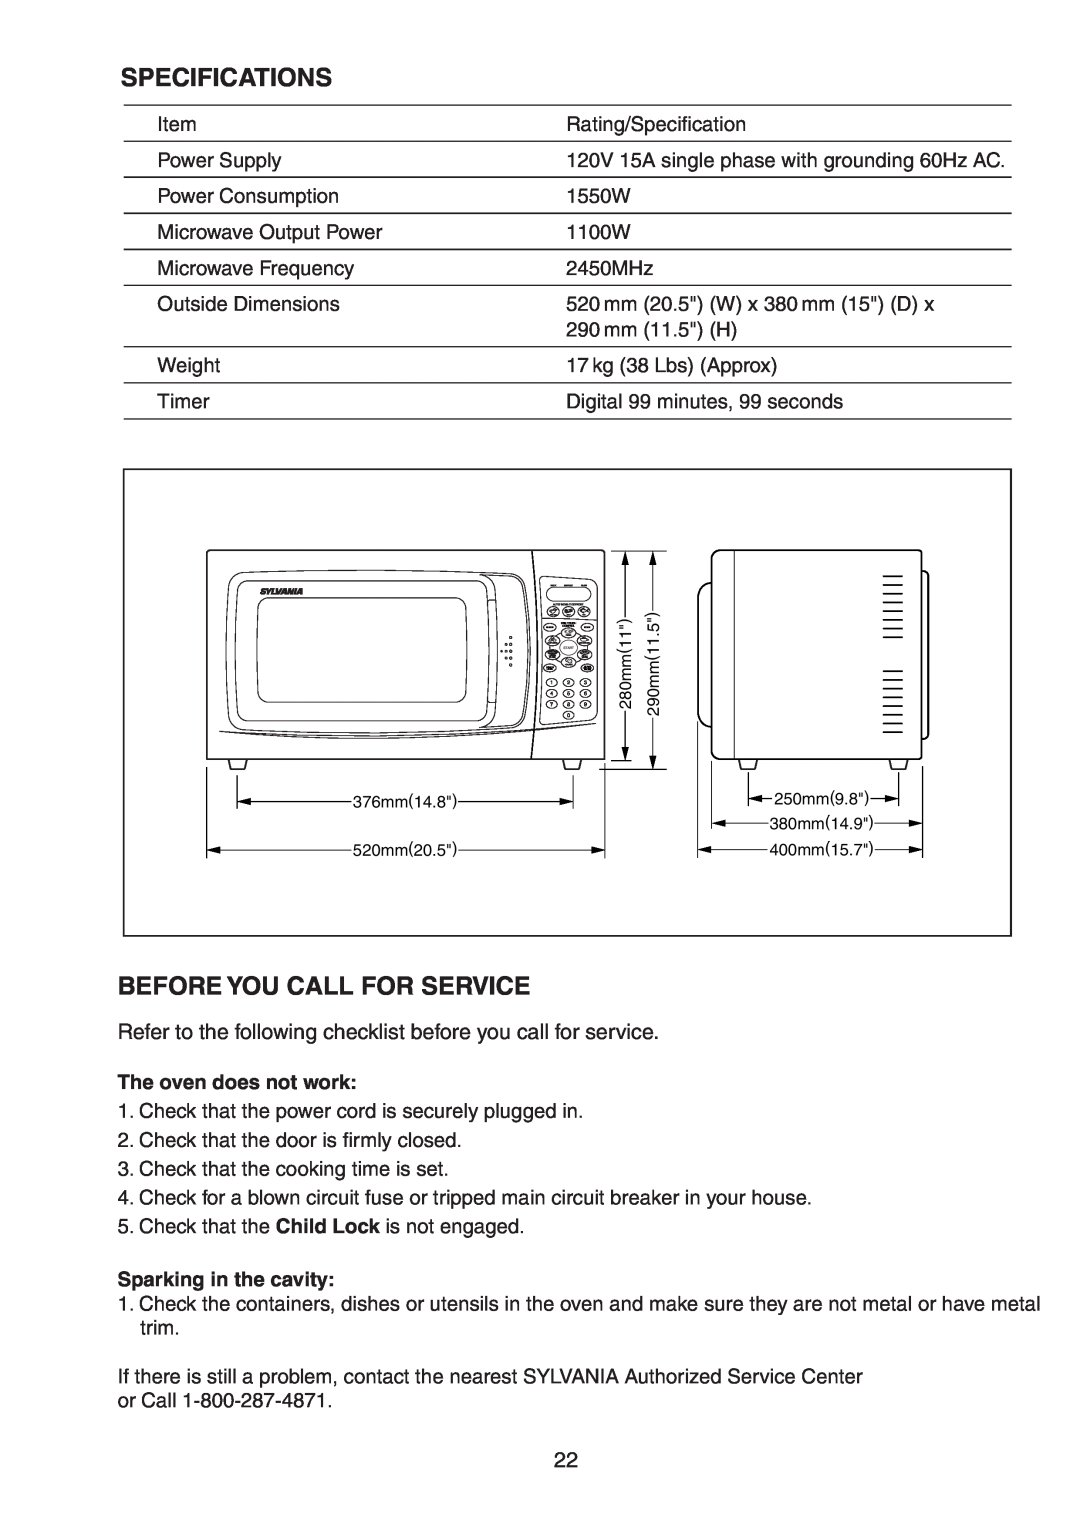 Sylvania SM81015 Specifications, Before You Call For Service, The oven does not work, Sparking in the cavity 